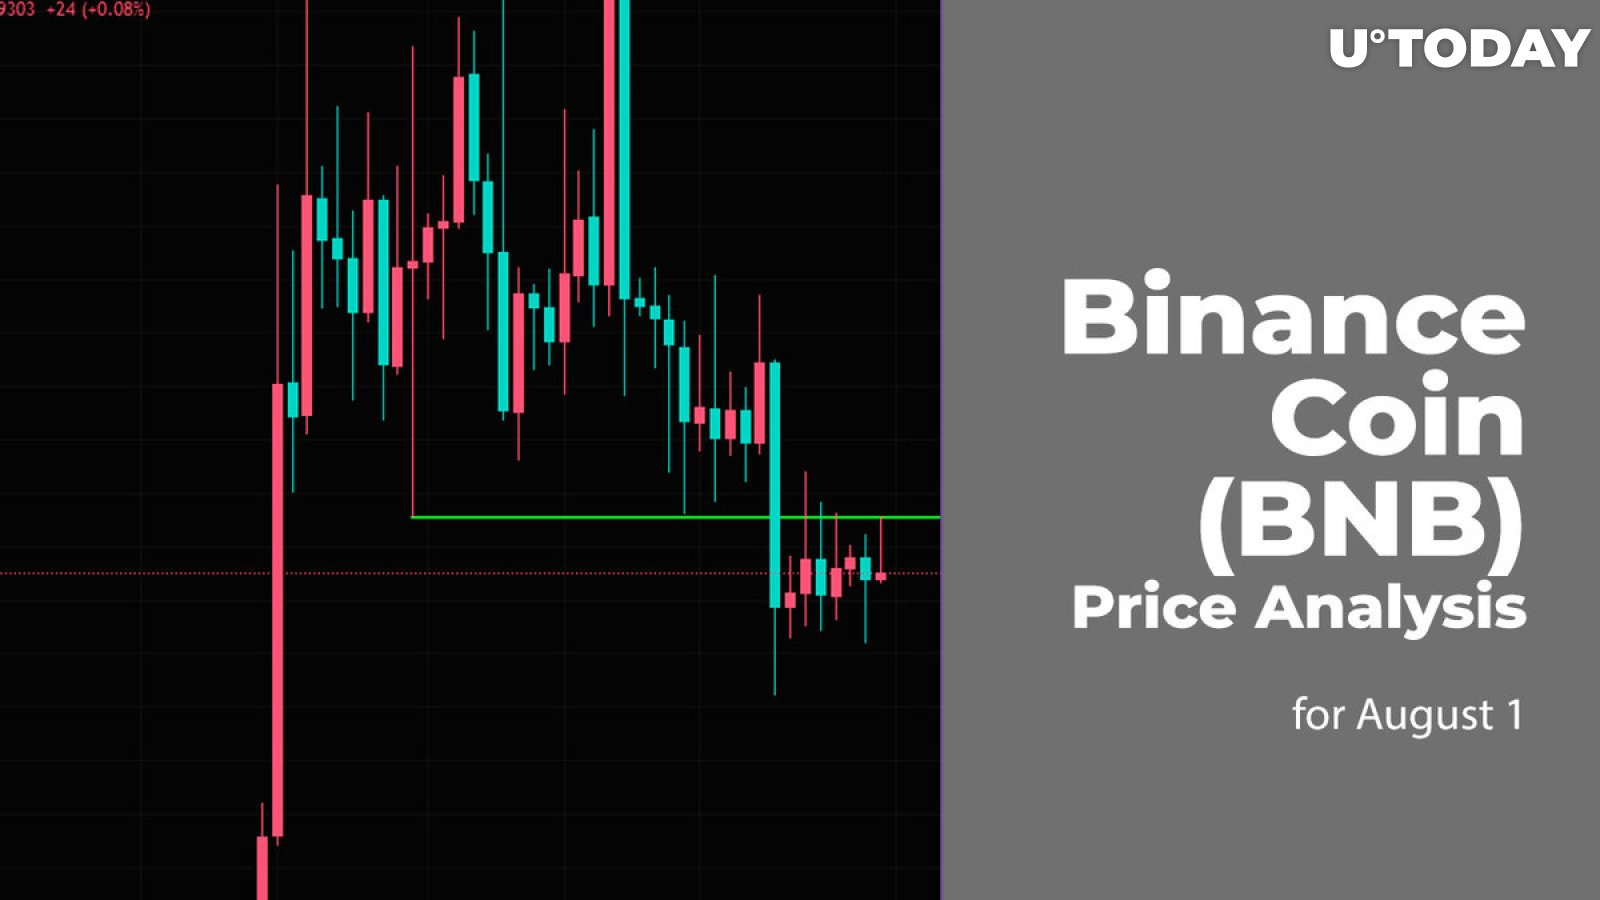 Binance Coin (BNB) Price Analysis for August 1